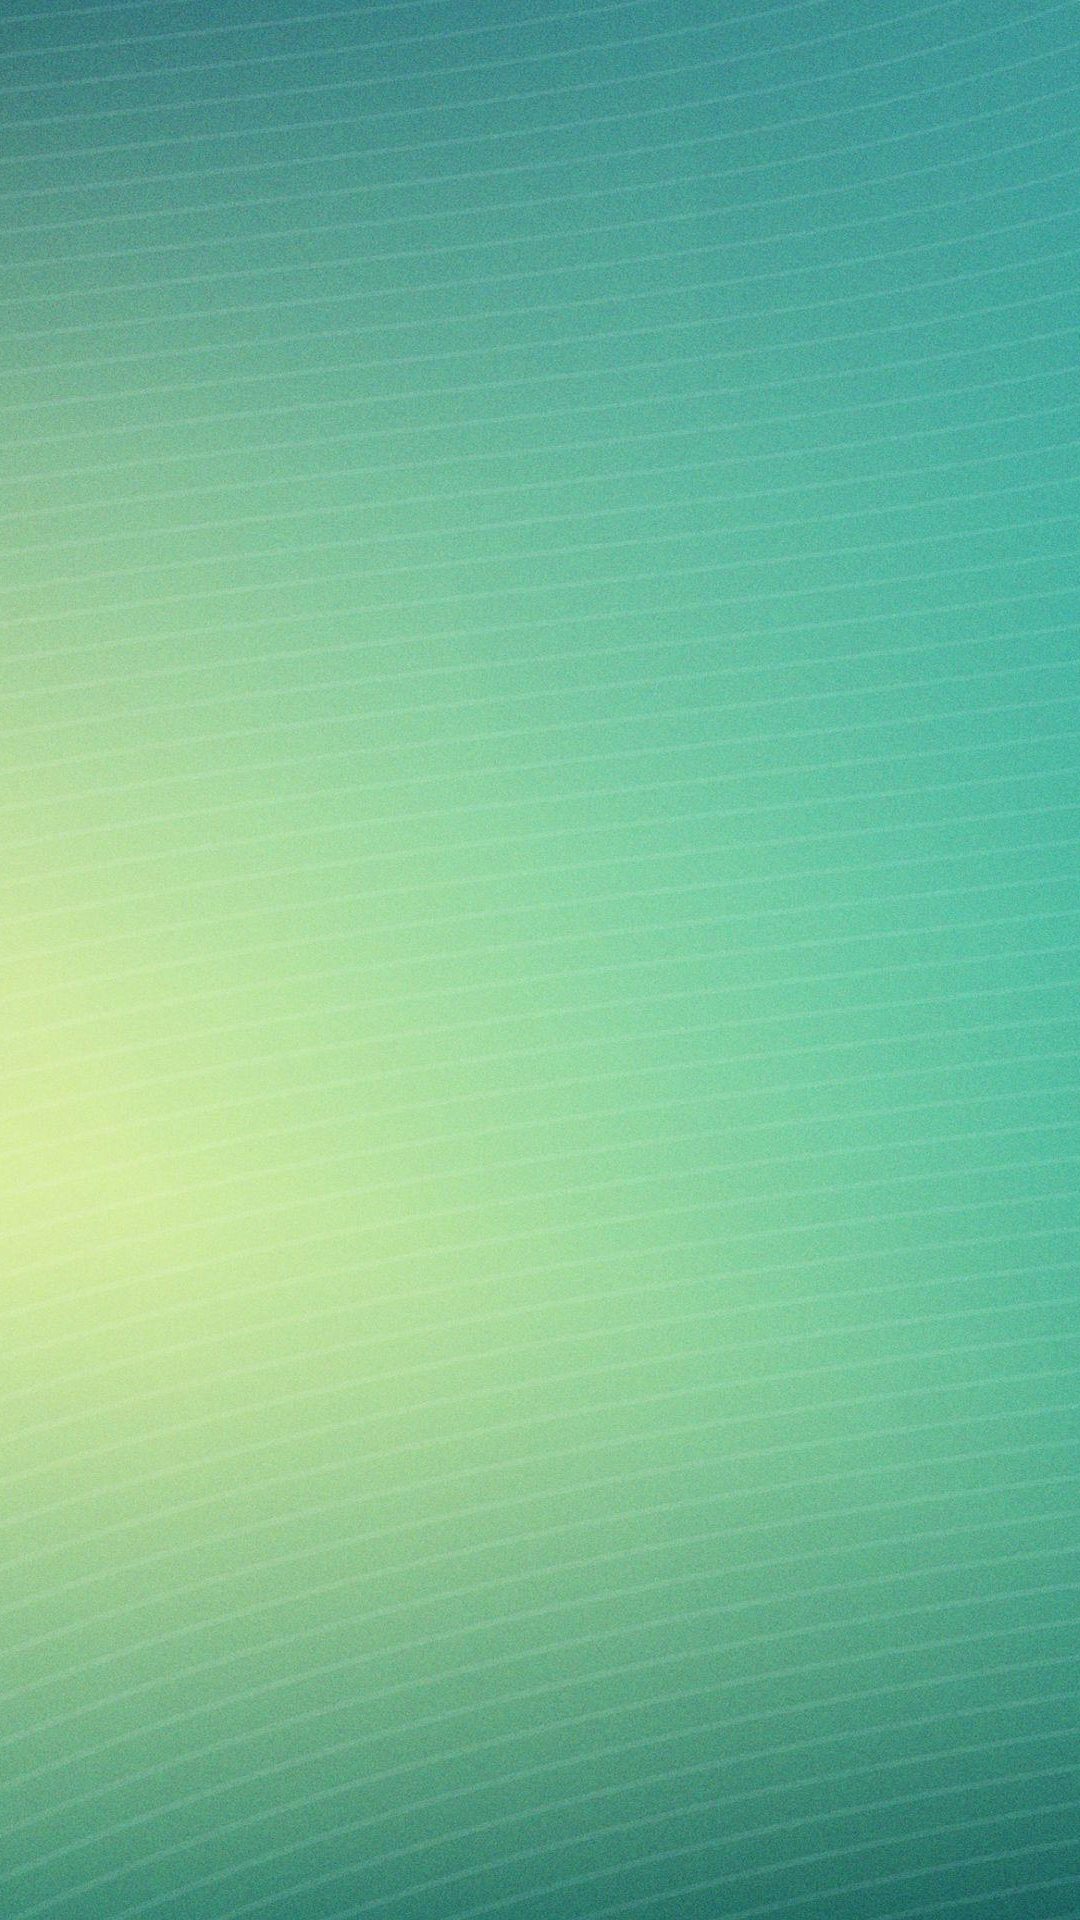 Green Glow PatternK wallpaper, free and easy to download